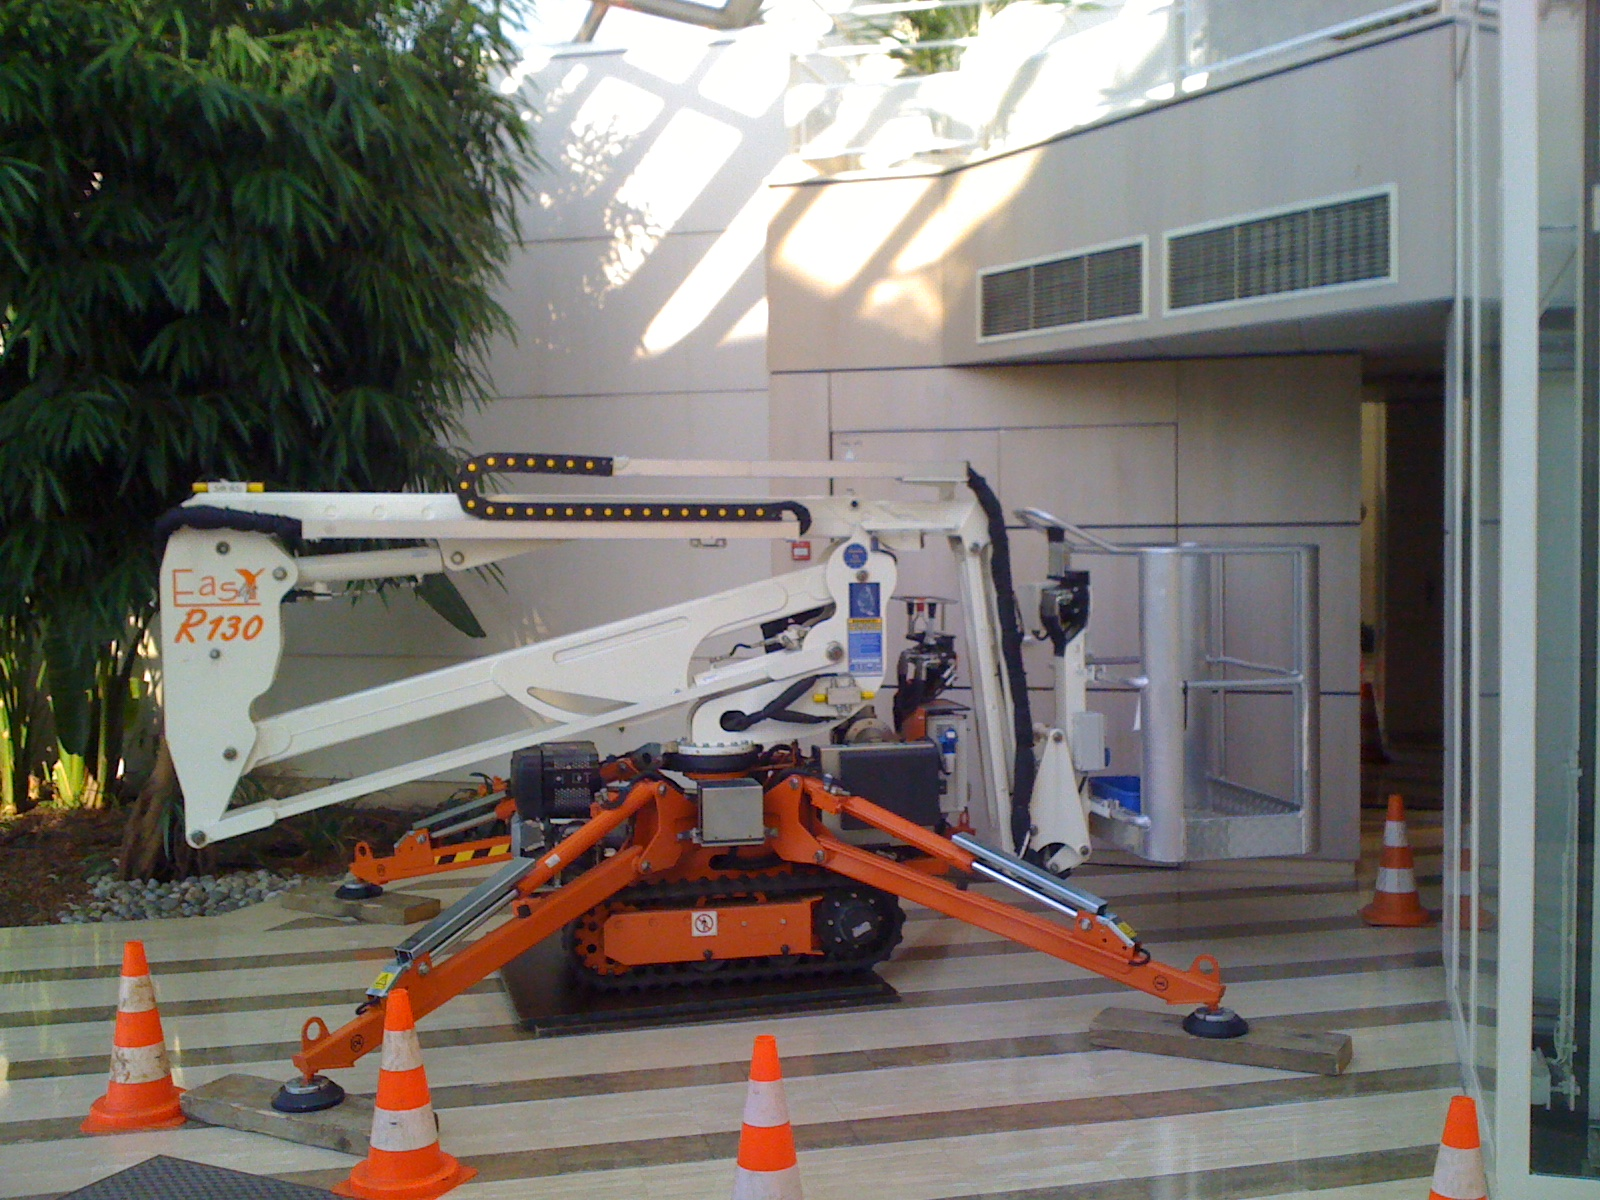 Photo of Easy Lift 40-20AJ spider lift working indoors on fragile surface